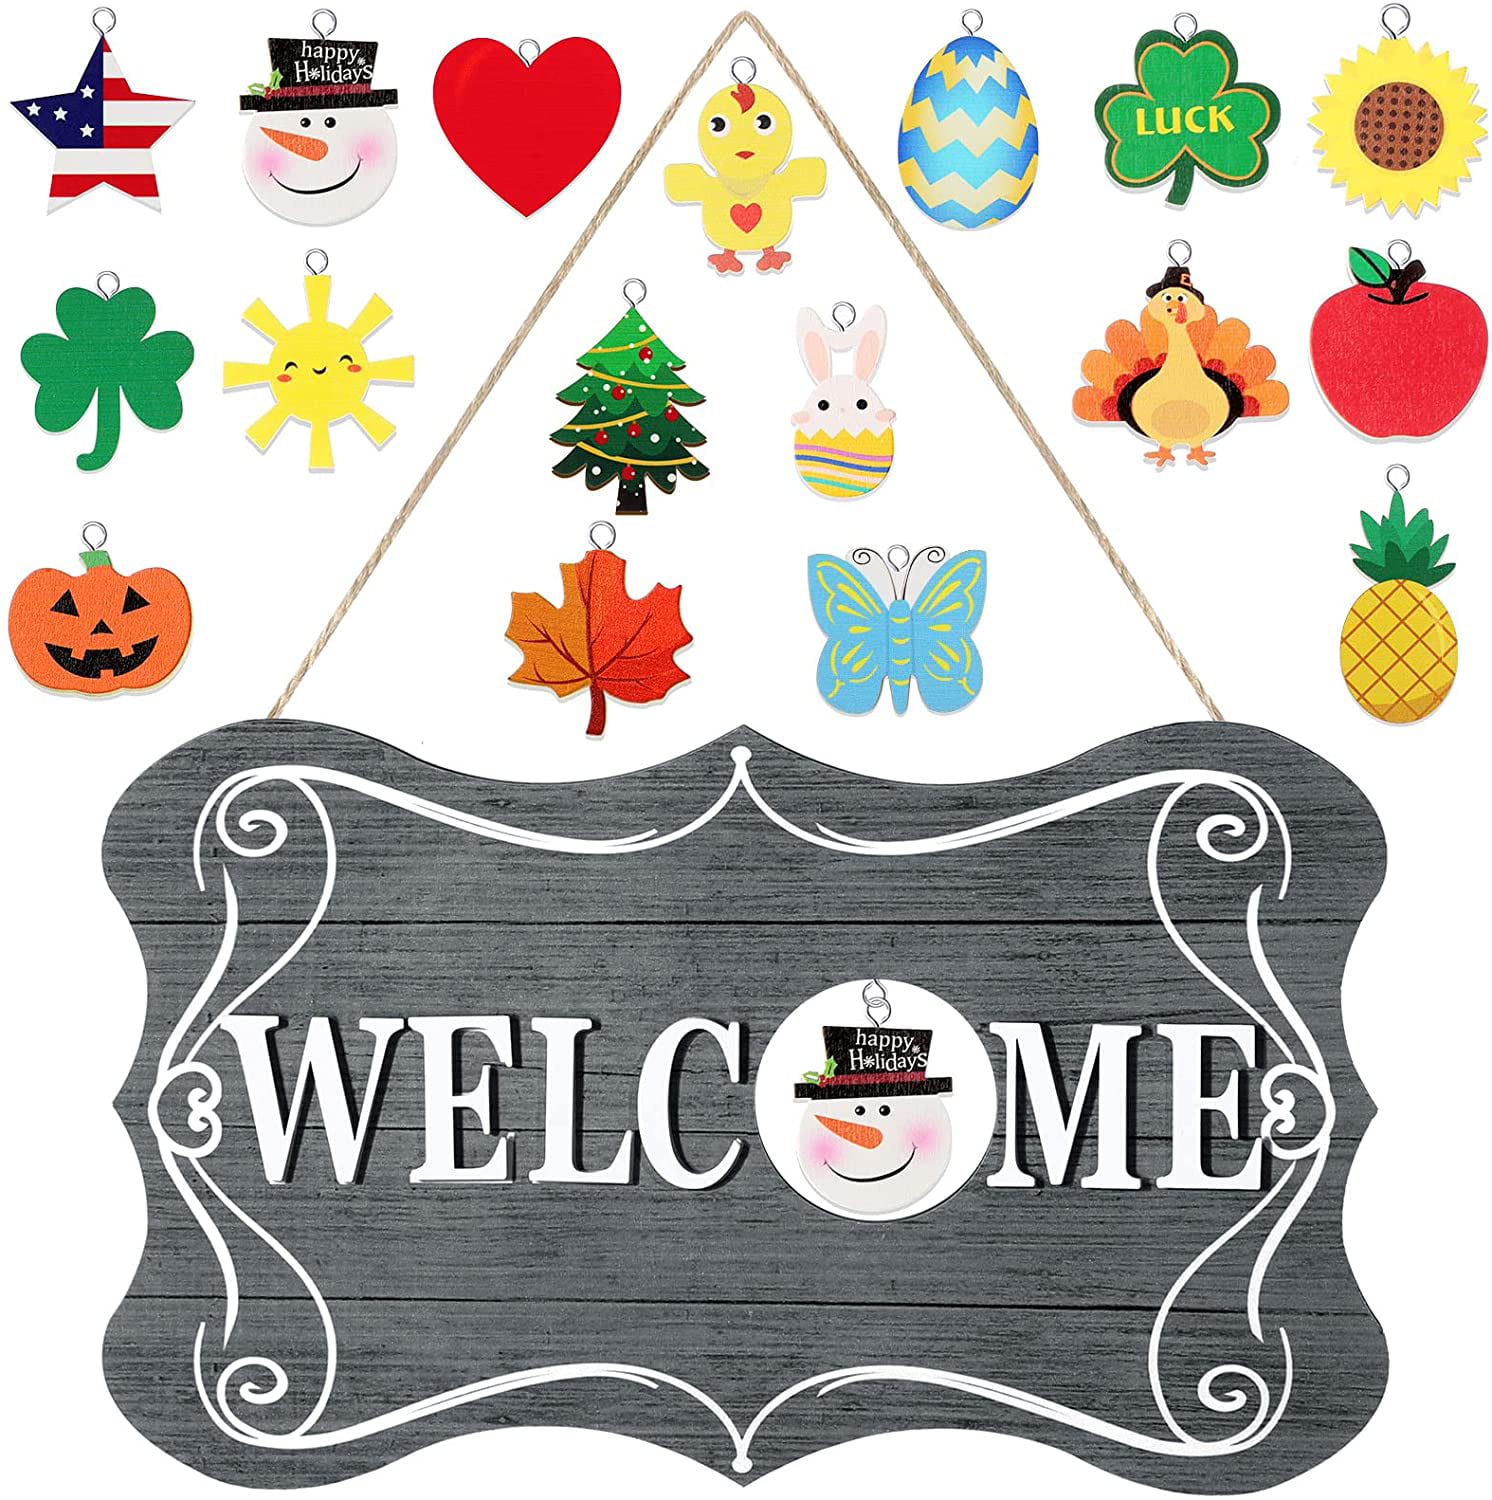 Welcome Hanging Sign with Interchangeable Holiday Pieces Front Door Garden Decor